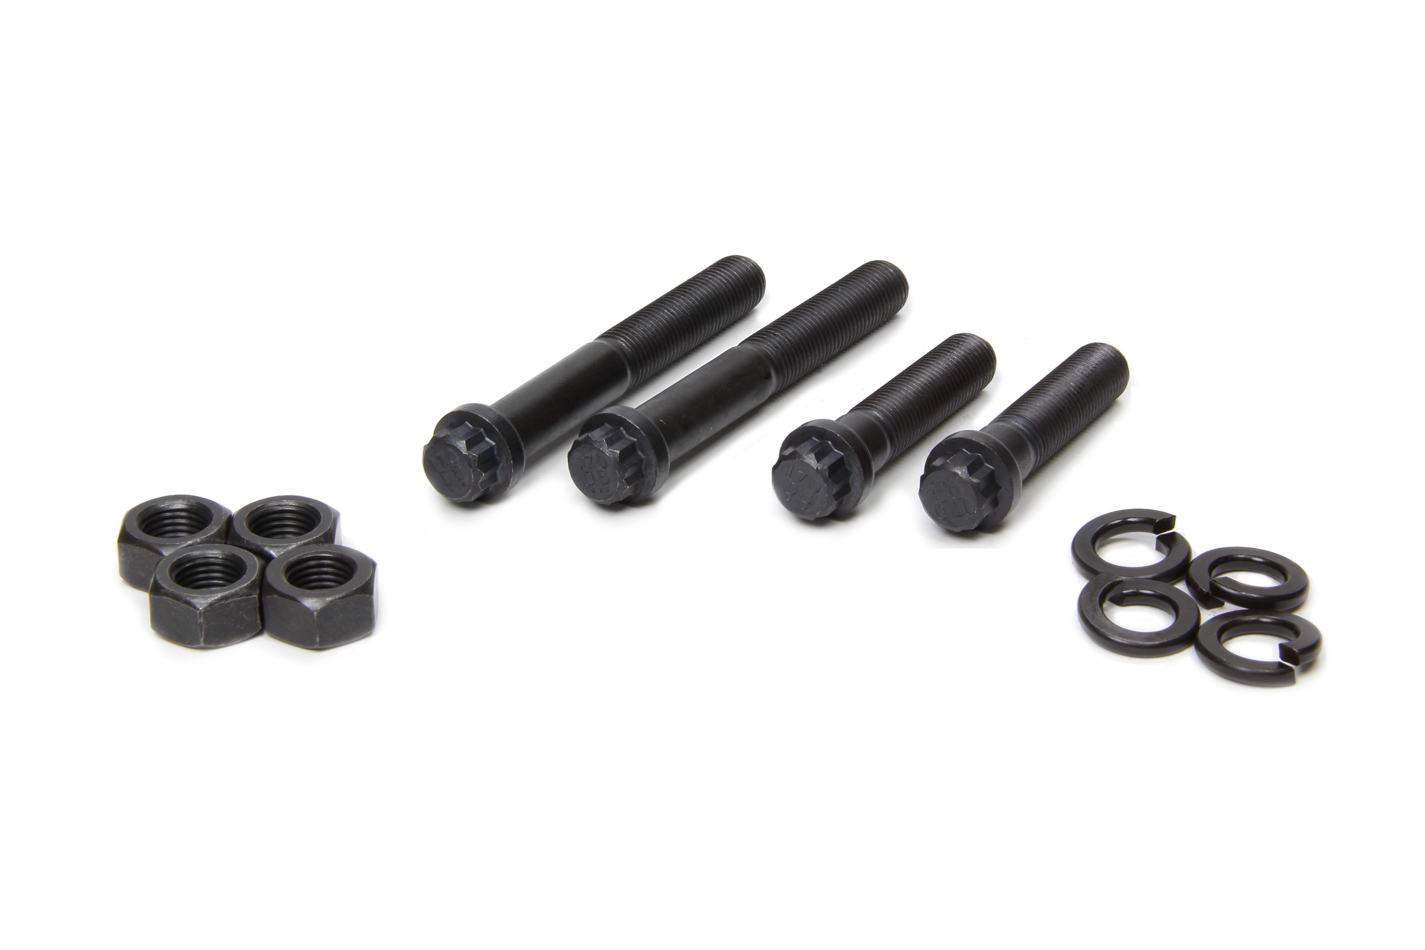 Argo Manufacturing AU437 Spindle Hardware, 7/16-20 Thread, Two 3-1/4 in Bolts, Two 2 in Long Bolts, 12 Point Head, Lock Washers / Nuts Included, Steel, Natural, Argo AMC Pacer Spindles, Kit